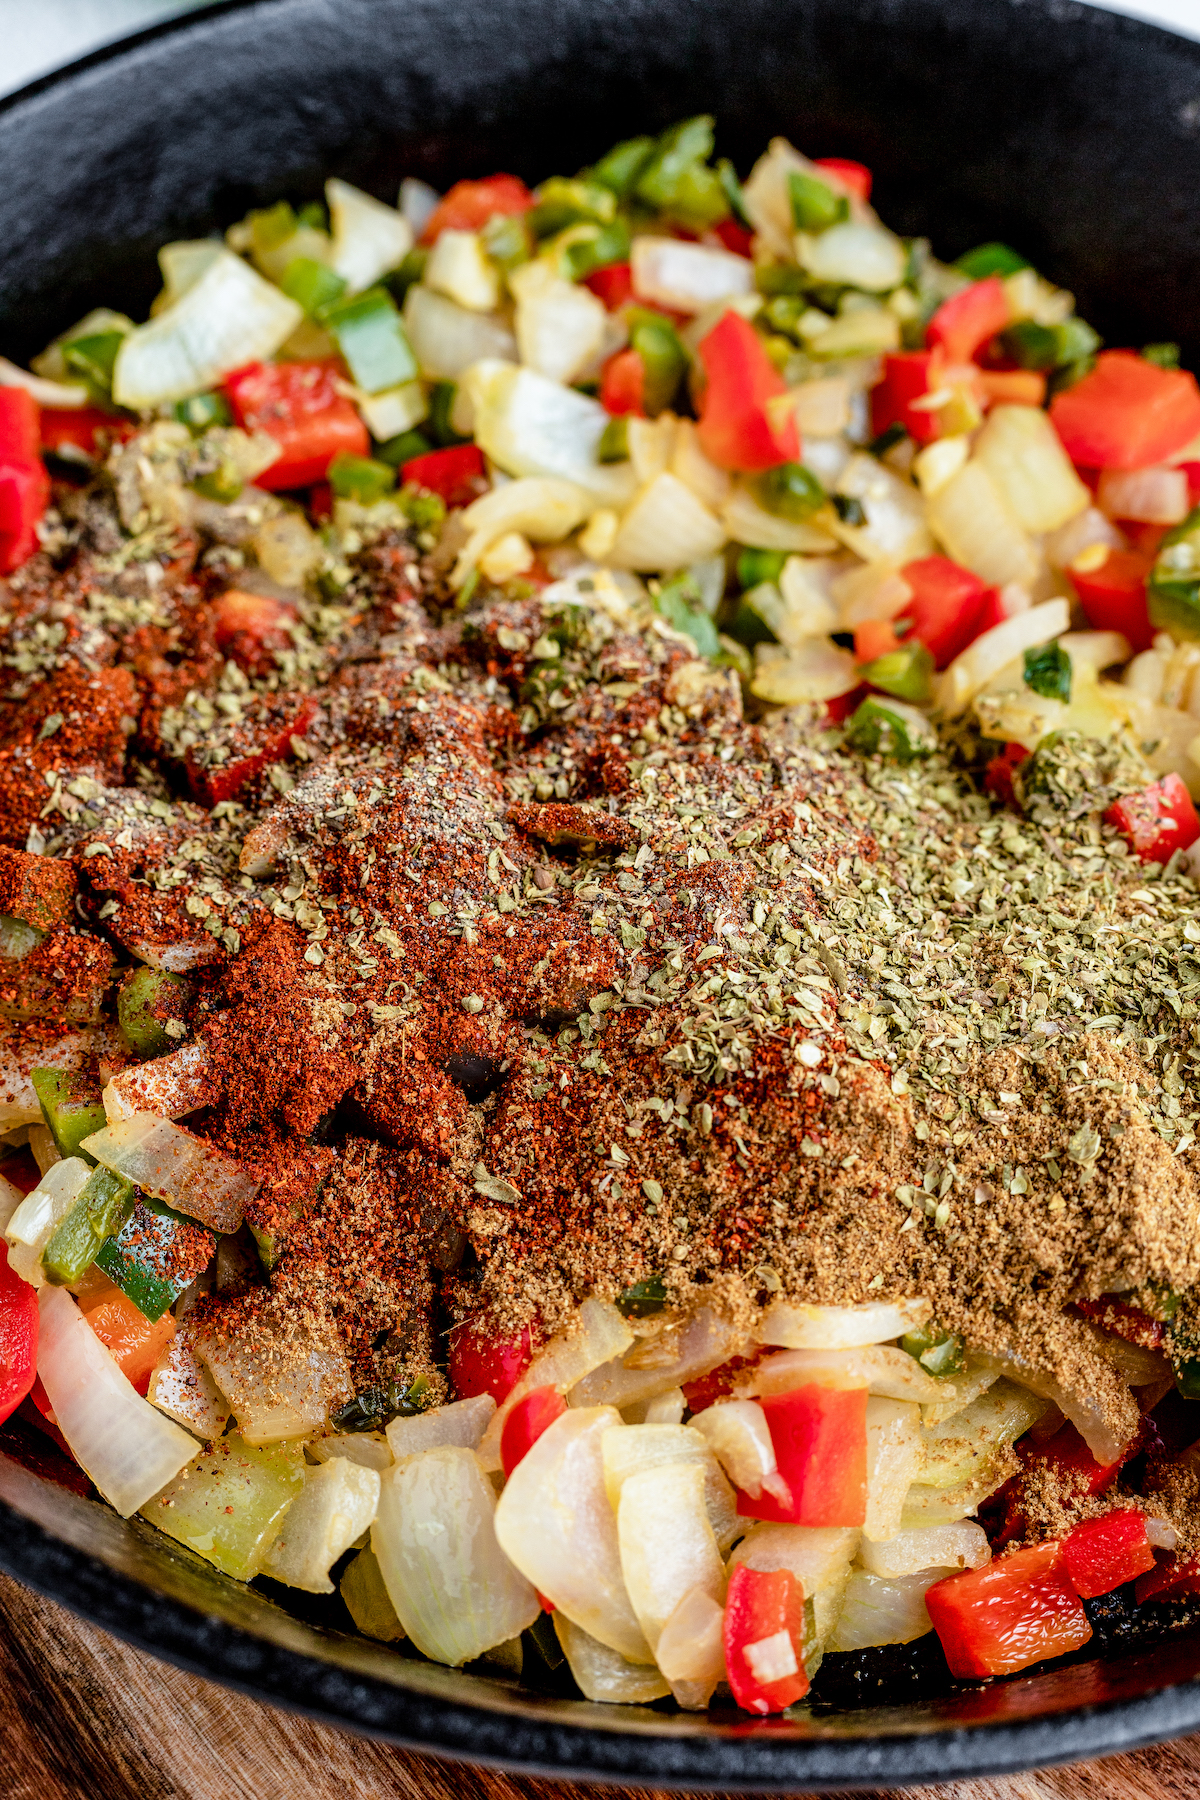 Spices are added into a skillet with sautéed vegetables.